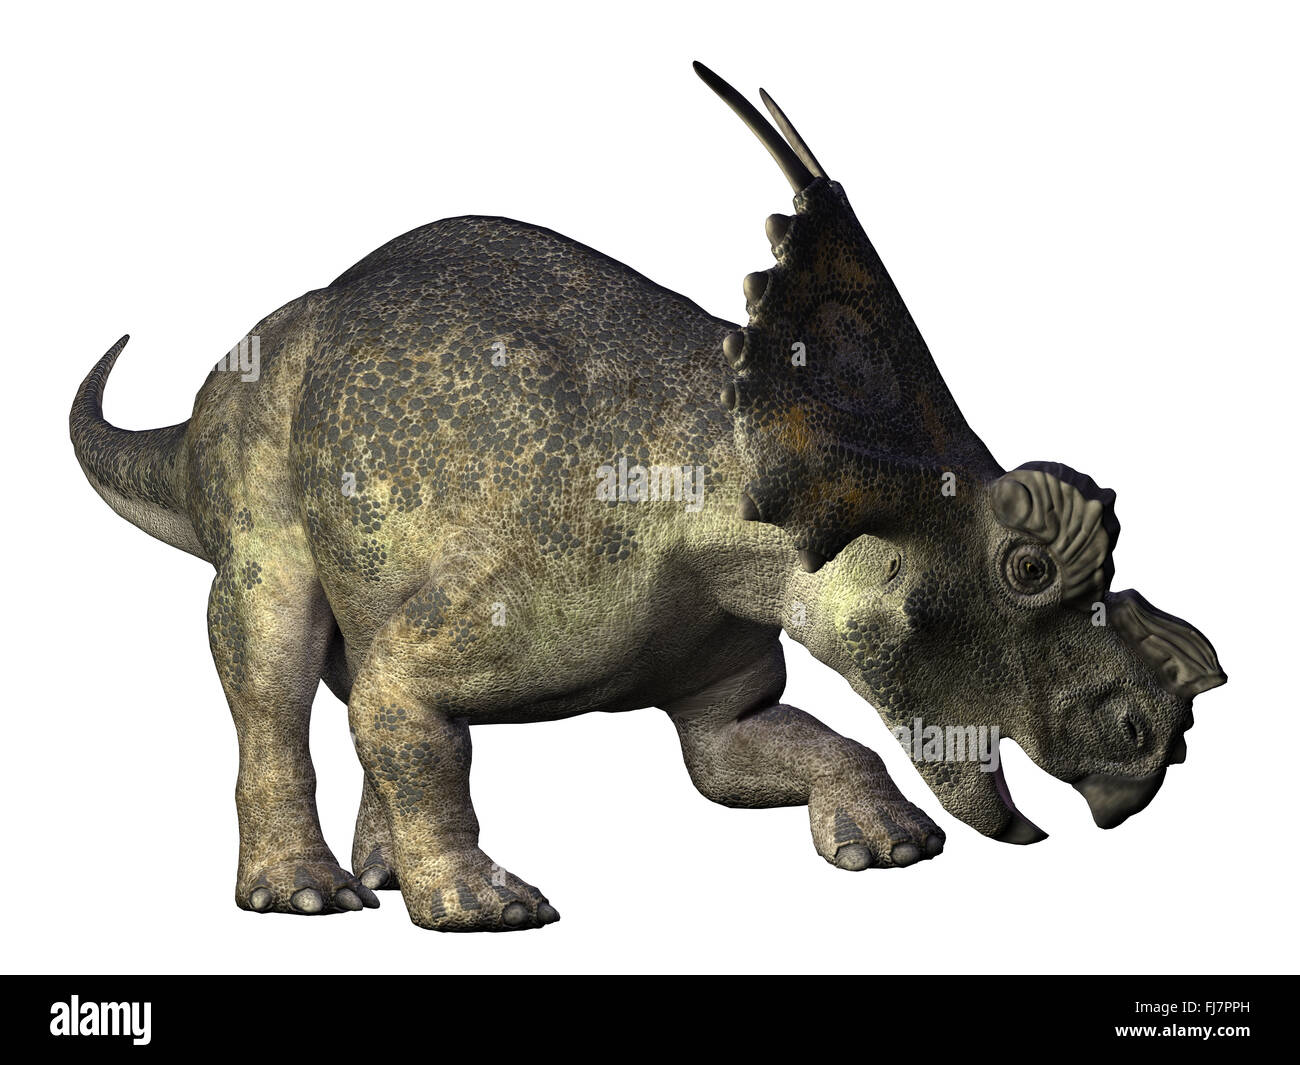 Achelousaurus is a genus of centrosaurine ceratopsid dinosaur that lived during the Late Cretaceous Period Stock Photo